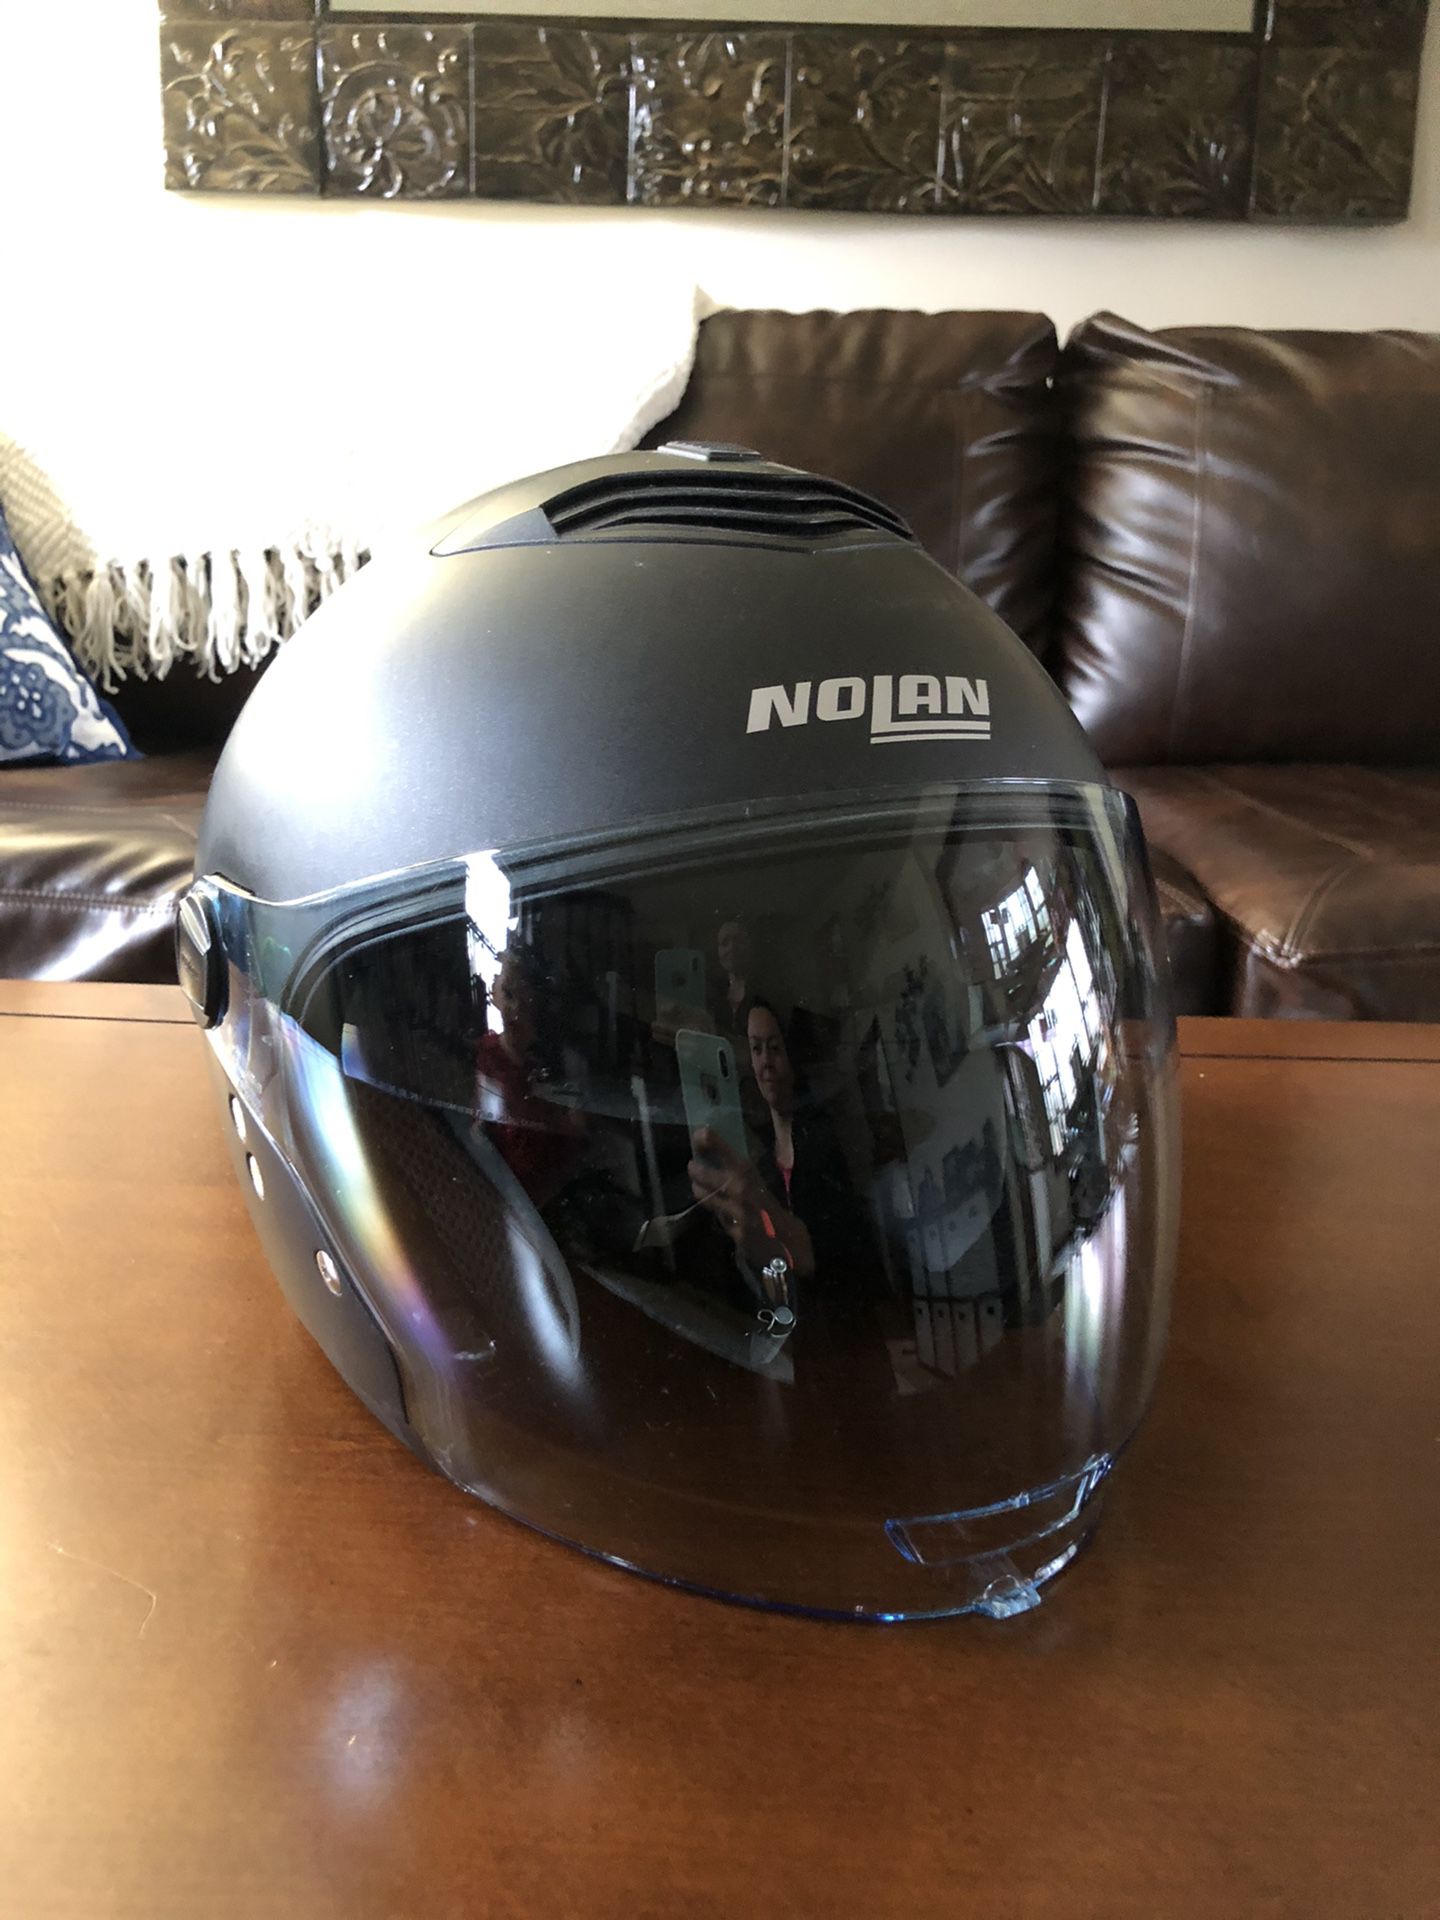 Nolan Motorcycle Helmets - Matching His and Hers